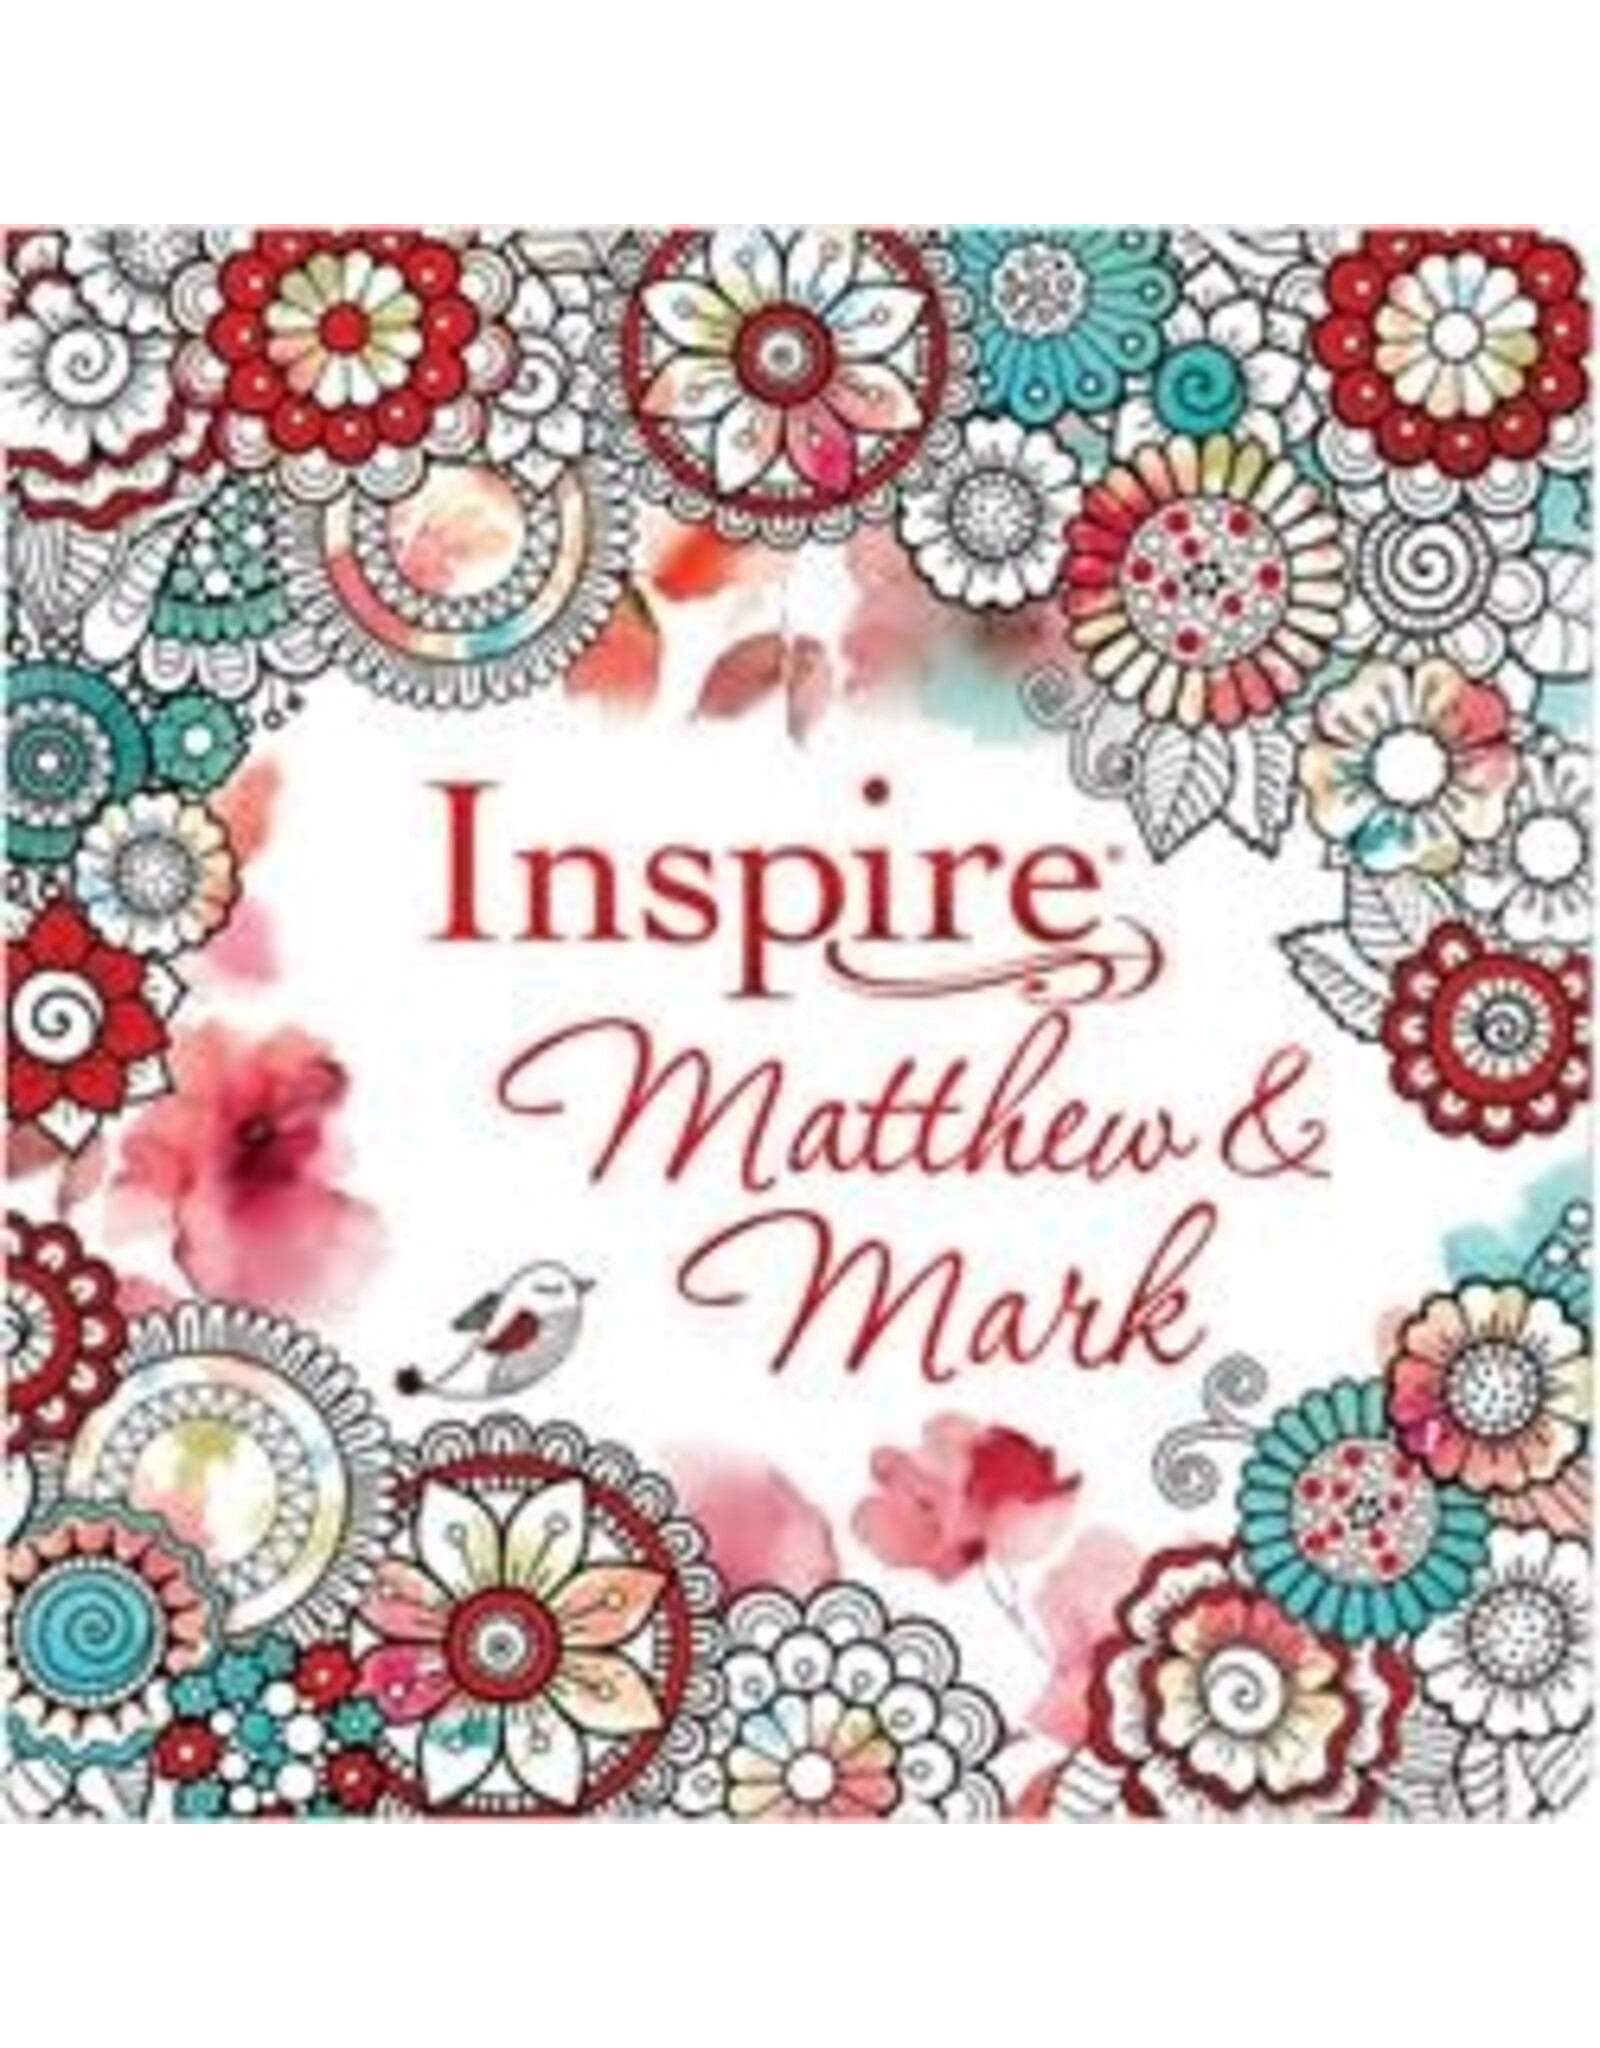 Inspire: Matthew & Mark Coloring & Creative Journaling - Soft Cover NLT